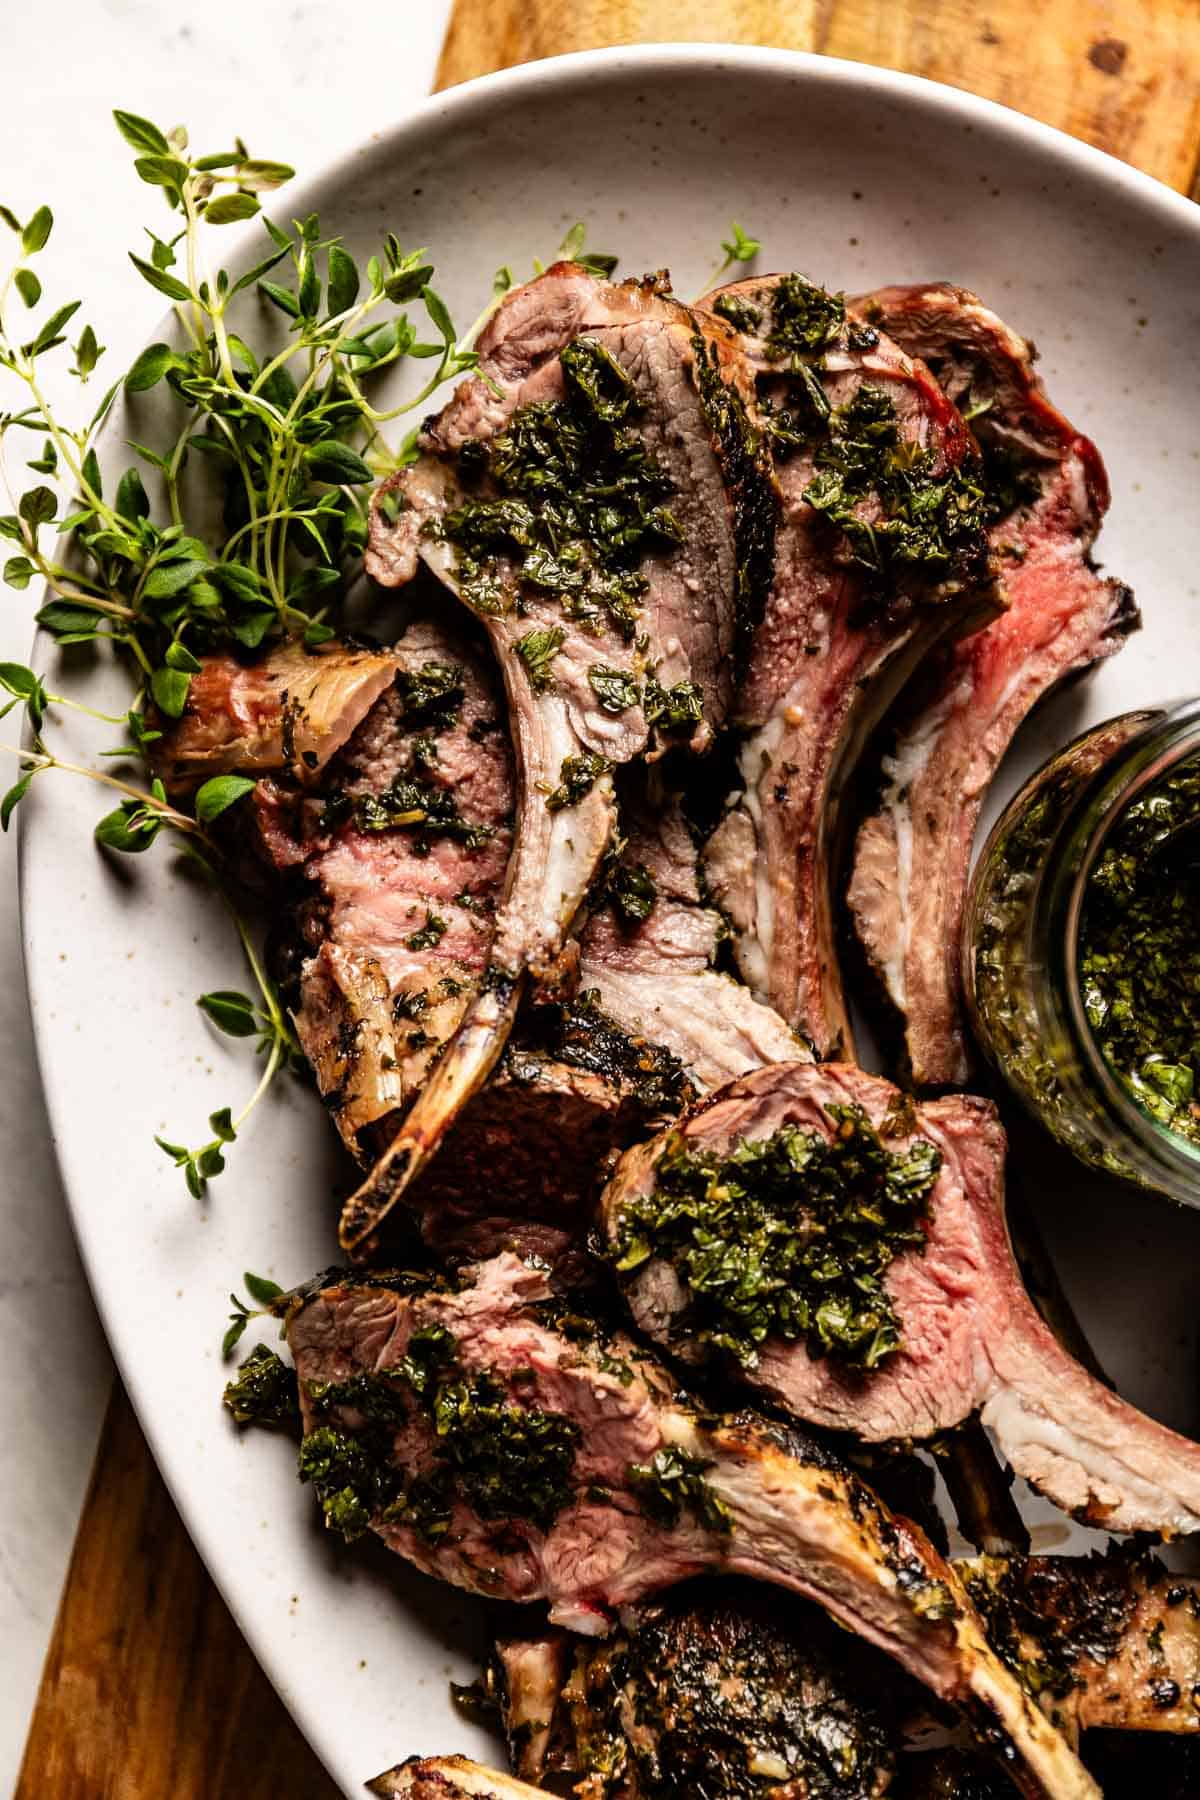 Barbecue rack of lamb on a plate garnished with thyme and mint sauce.